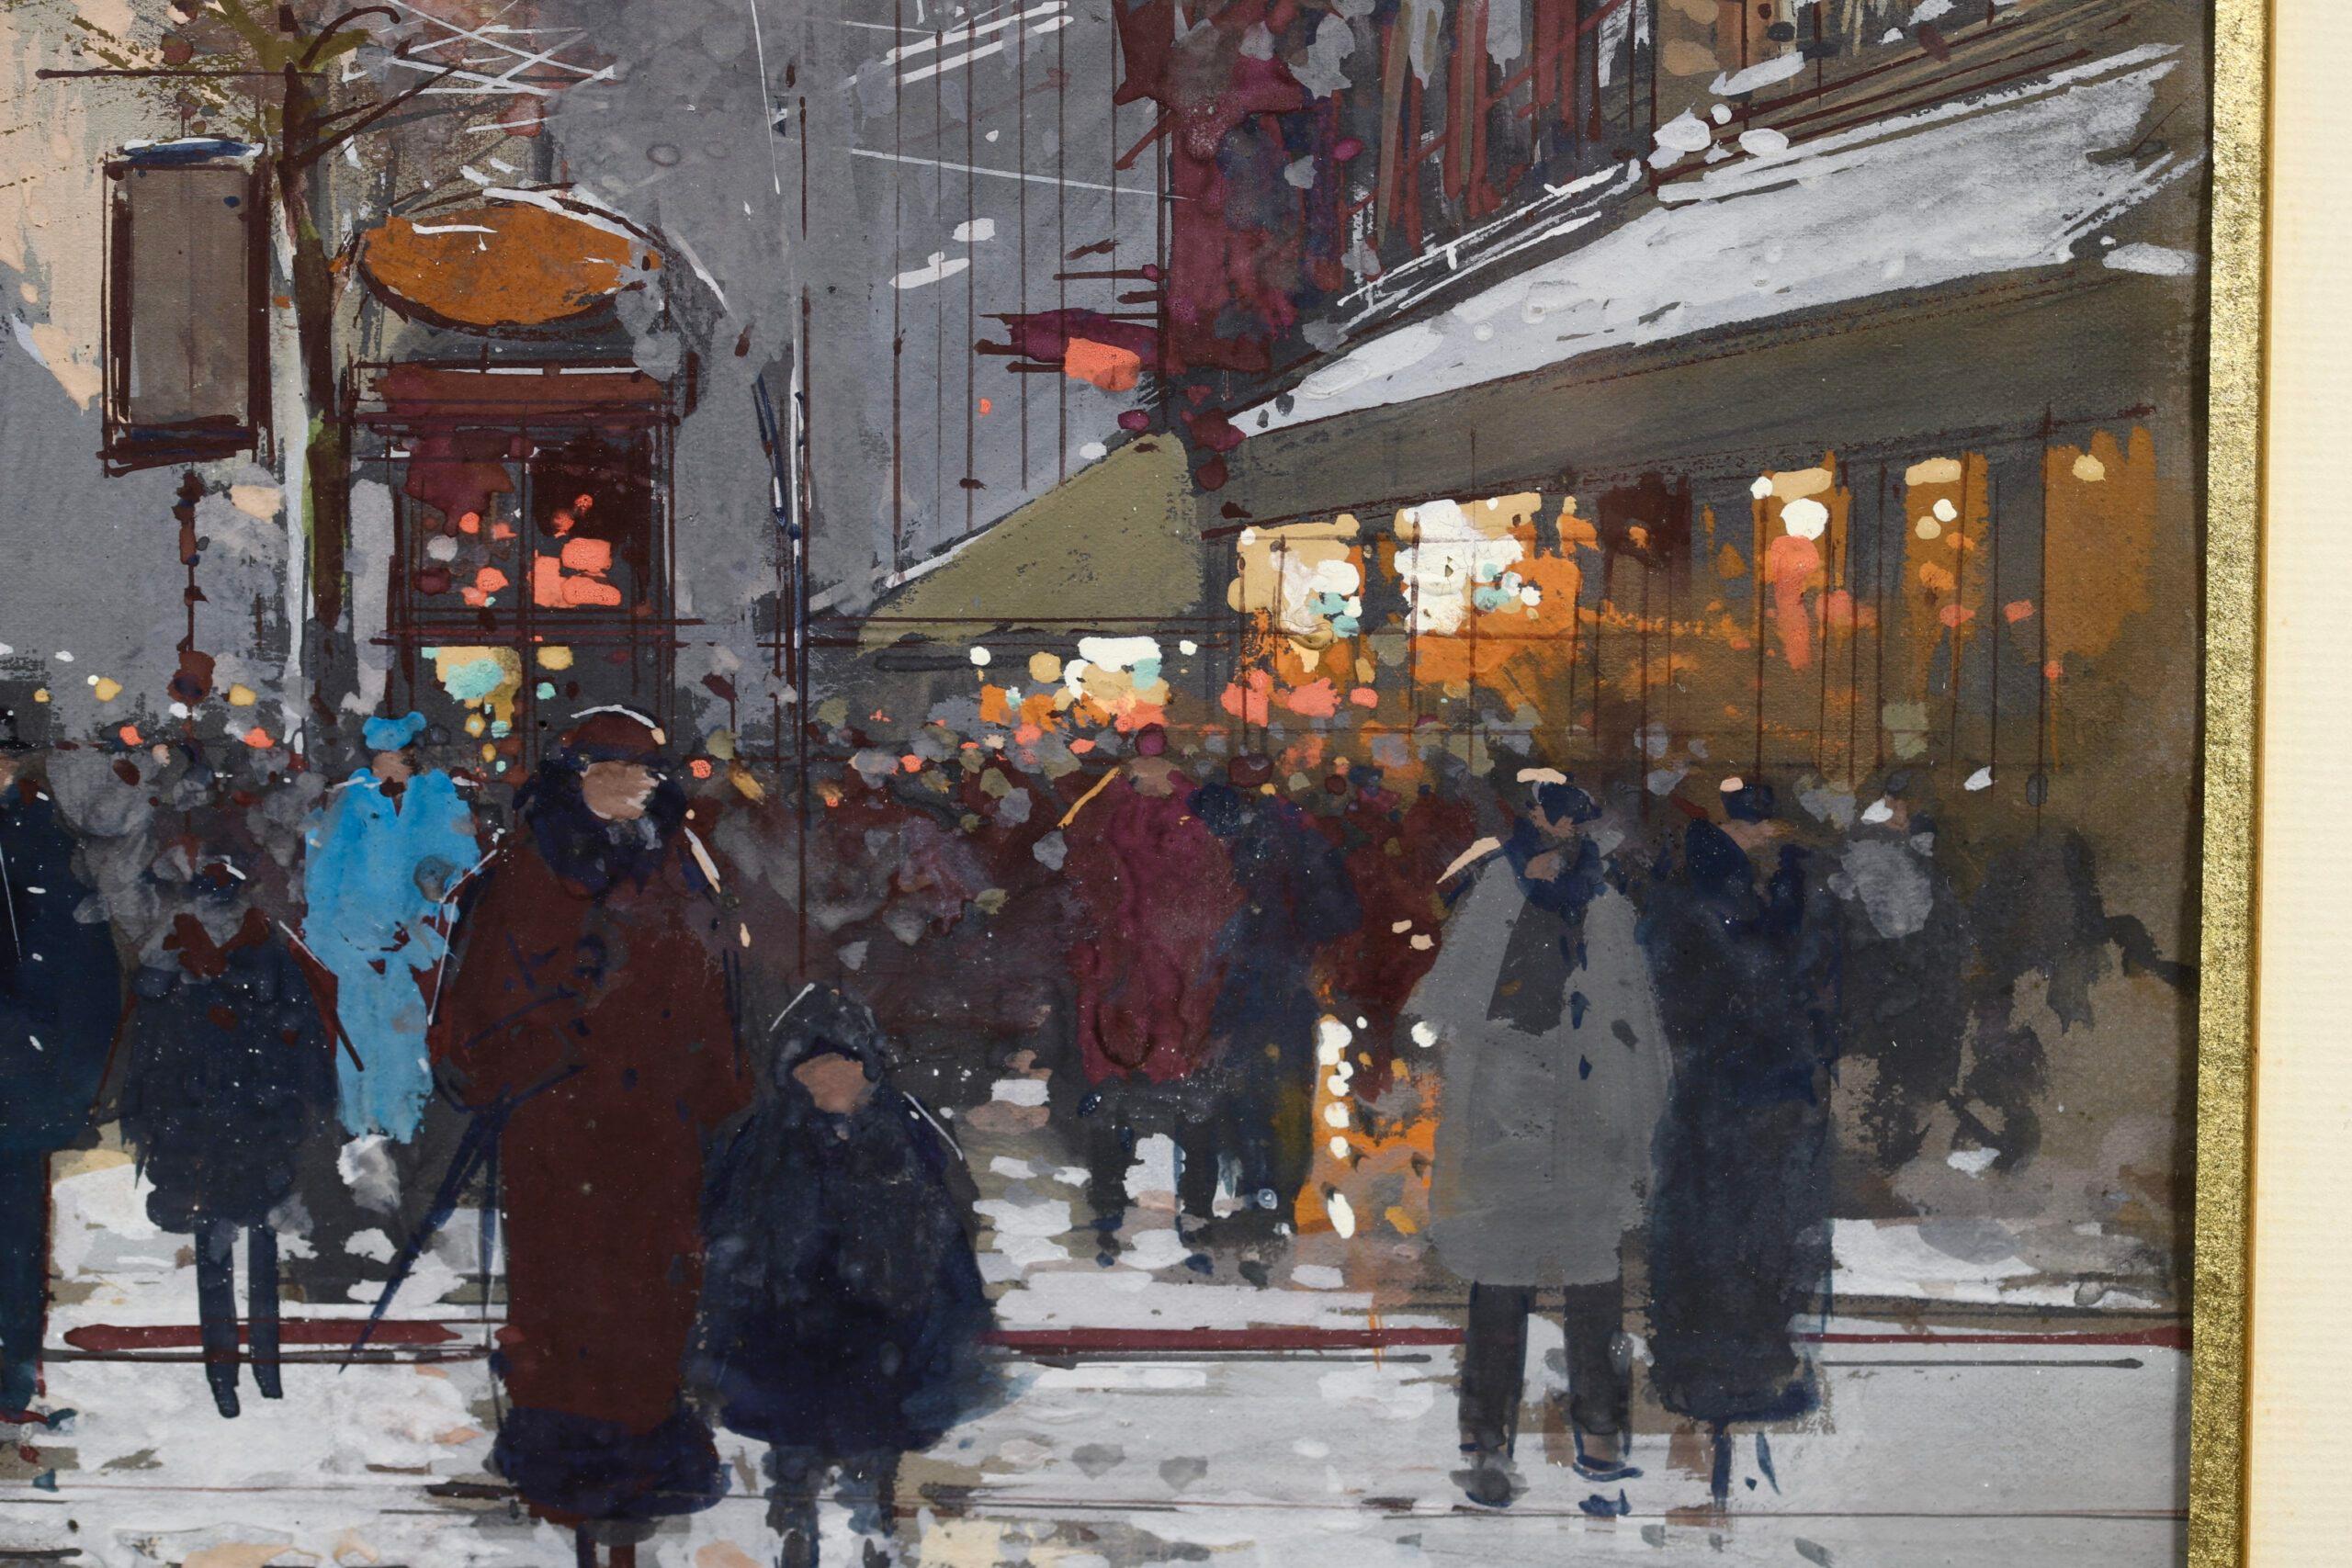 Winter - Porte St Denis - Impressionist Cityscape Painting by Edouard Cortes 10